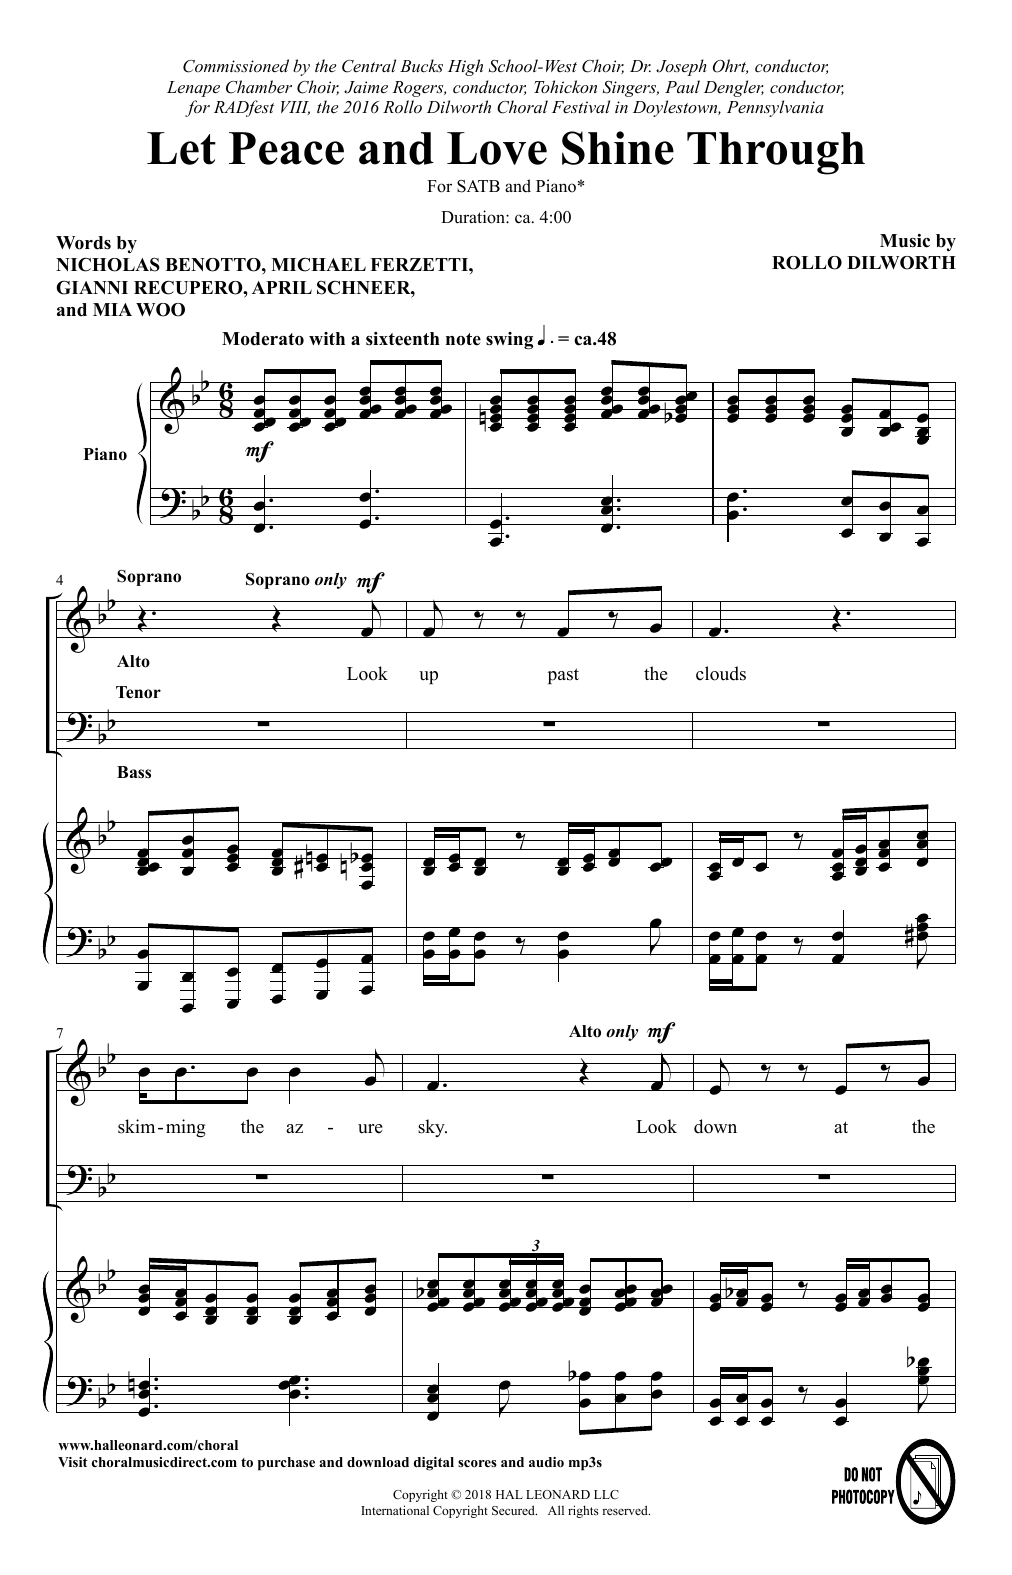 Download Rollo Dilworth Let Peace And Love Shine Through Sheet Music